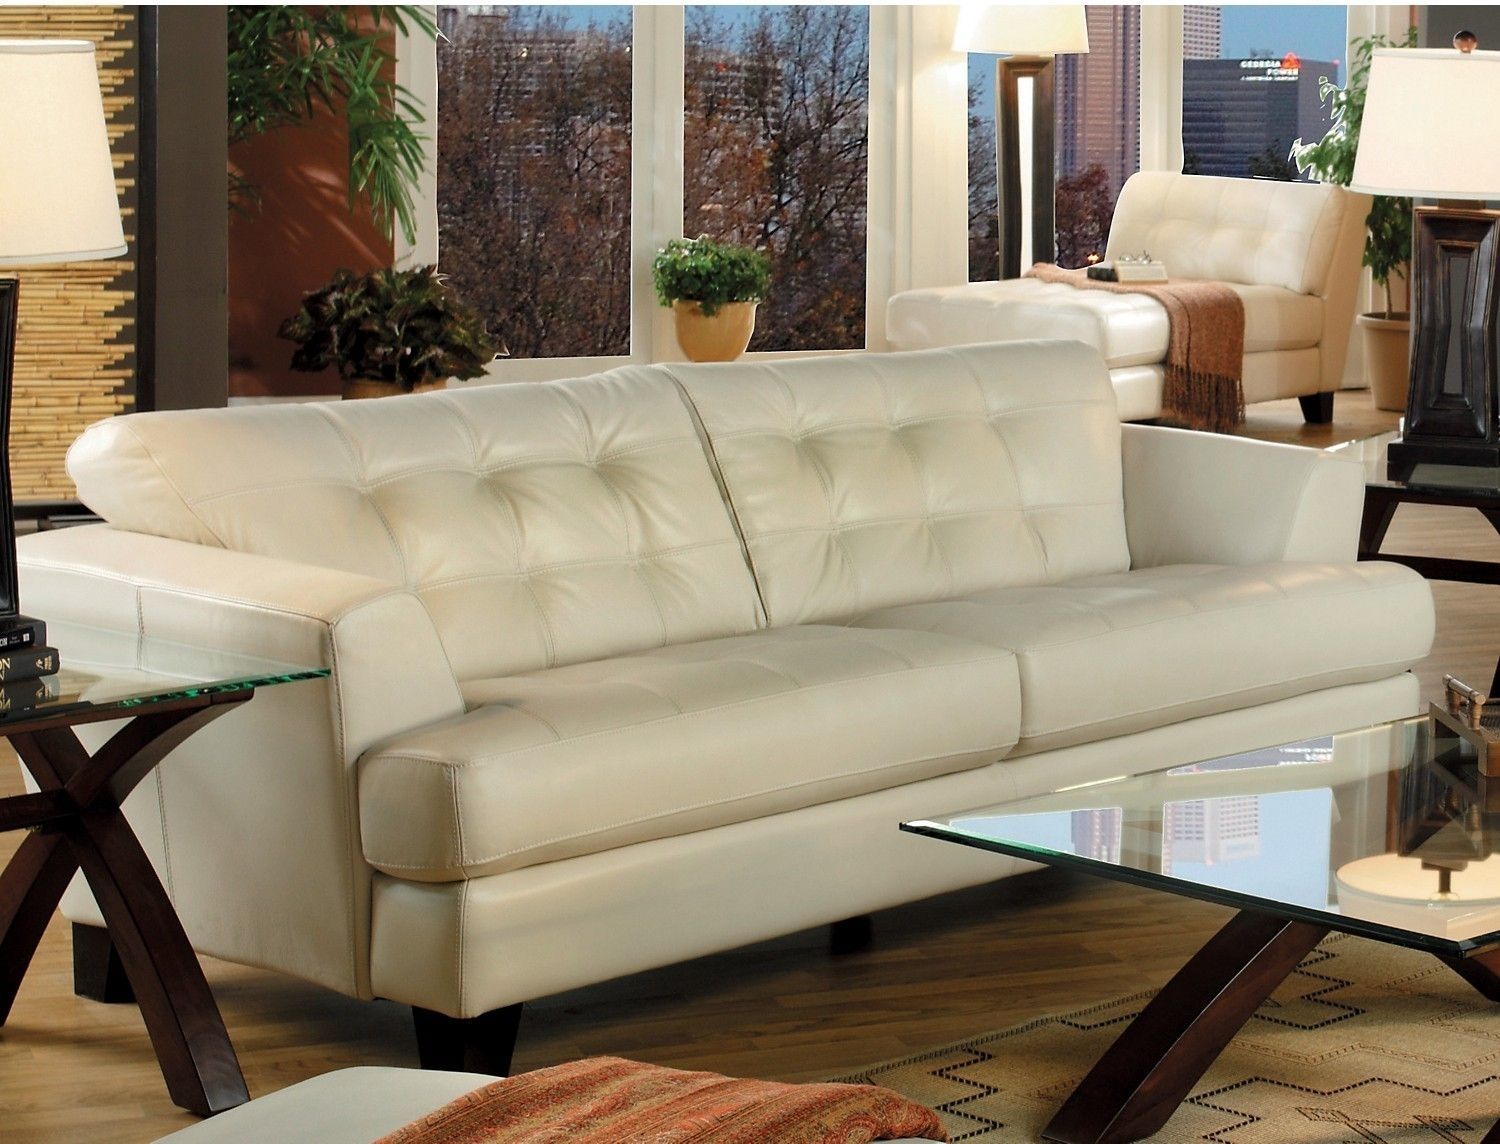 Main Floor. Avenue Genuine Leather Sofa – Ivory | The Brick | Home Within The Brick Leather Sofas (Photo 4 of 10)